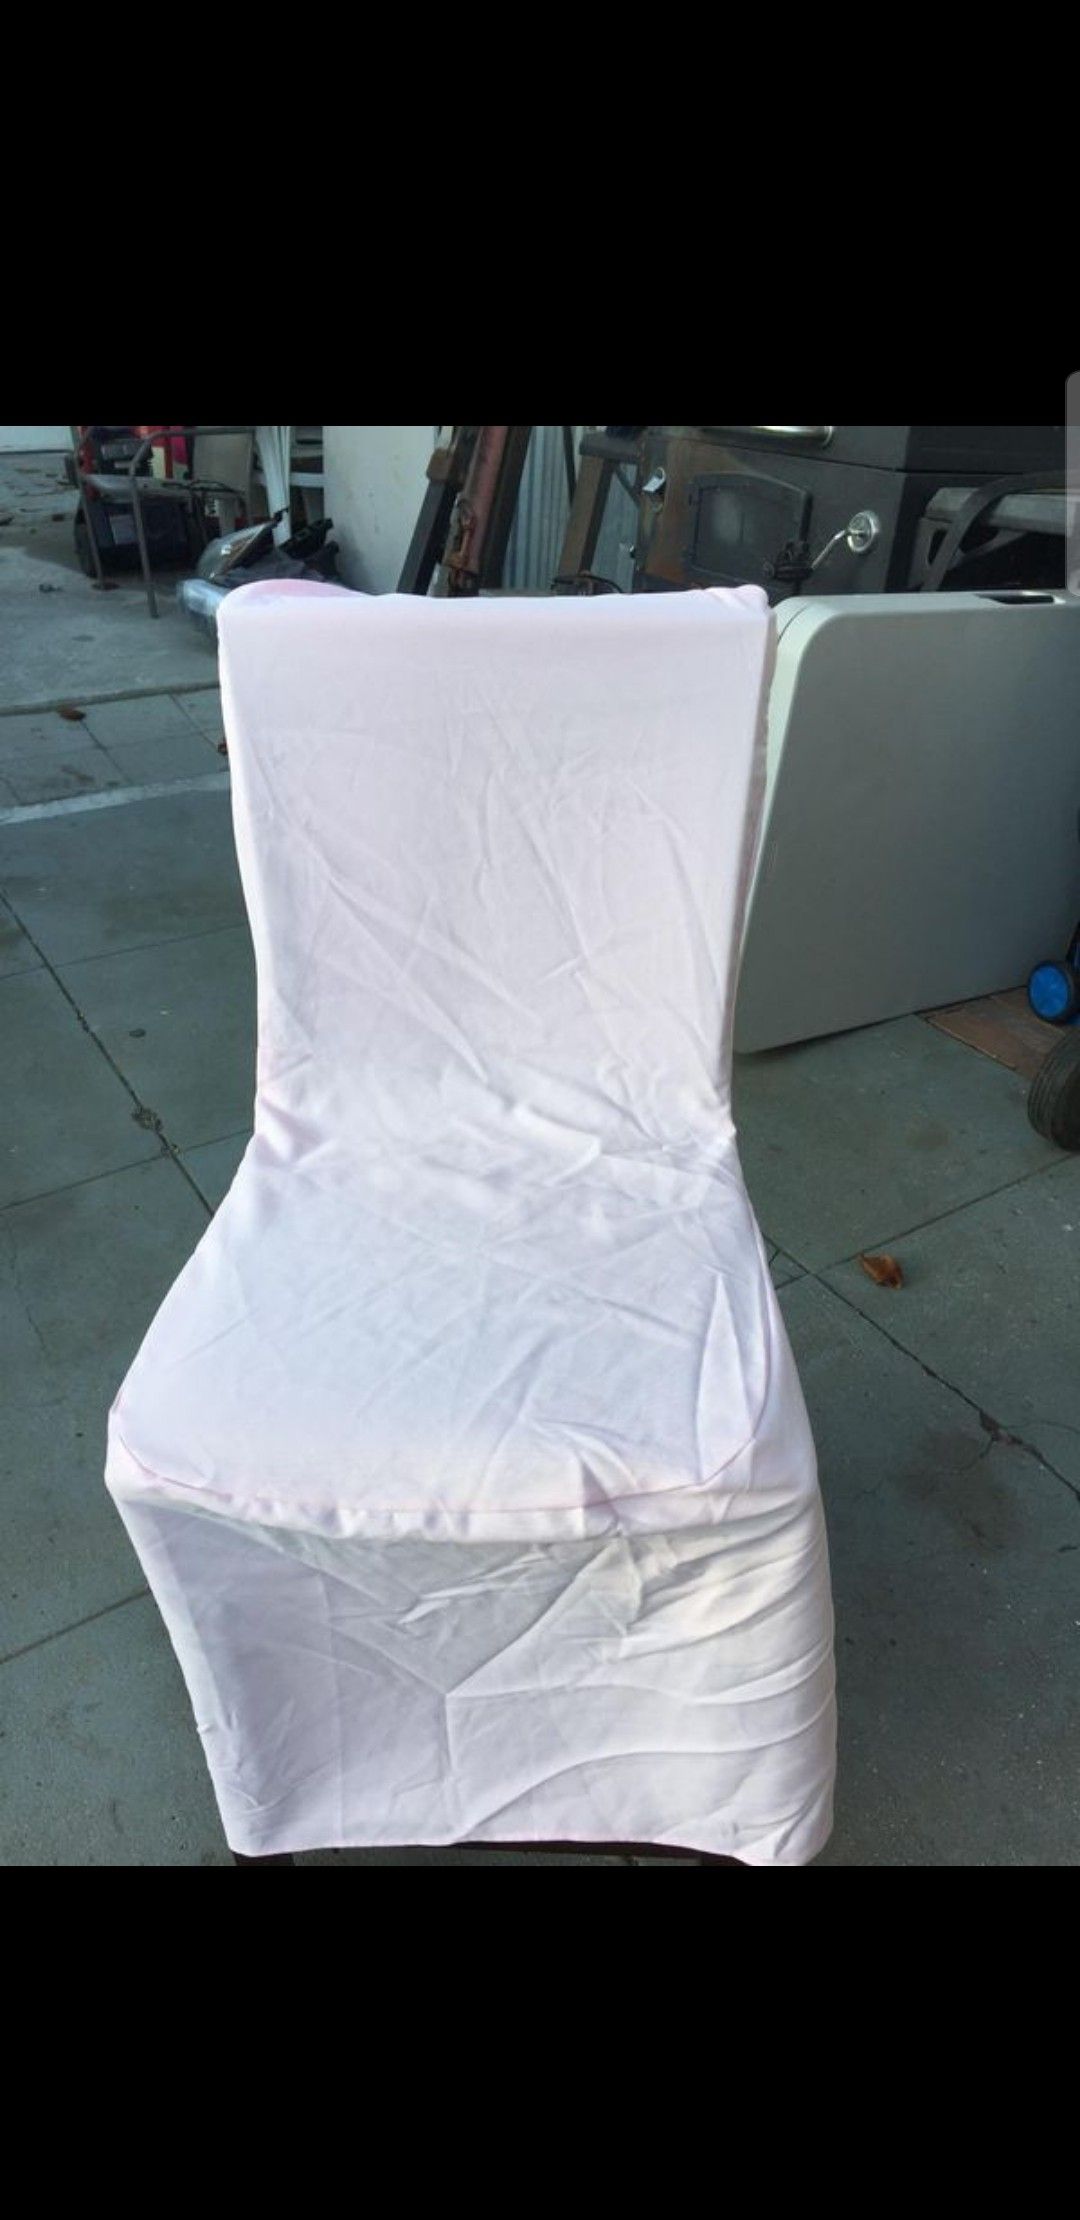 Foros(chair covers) color pink